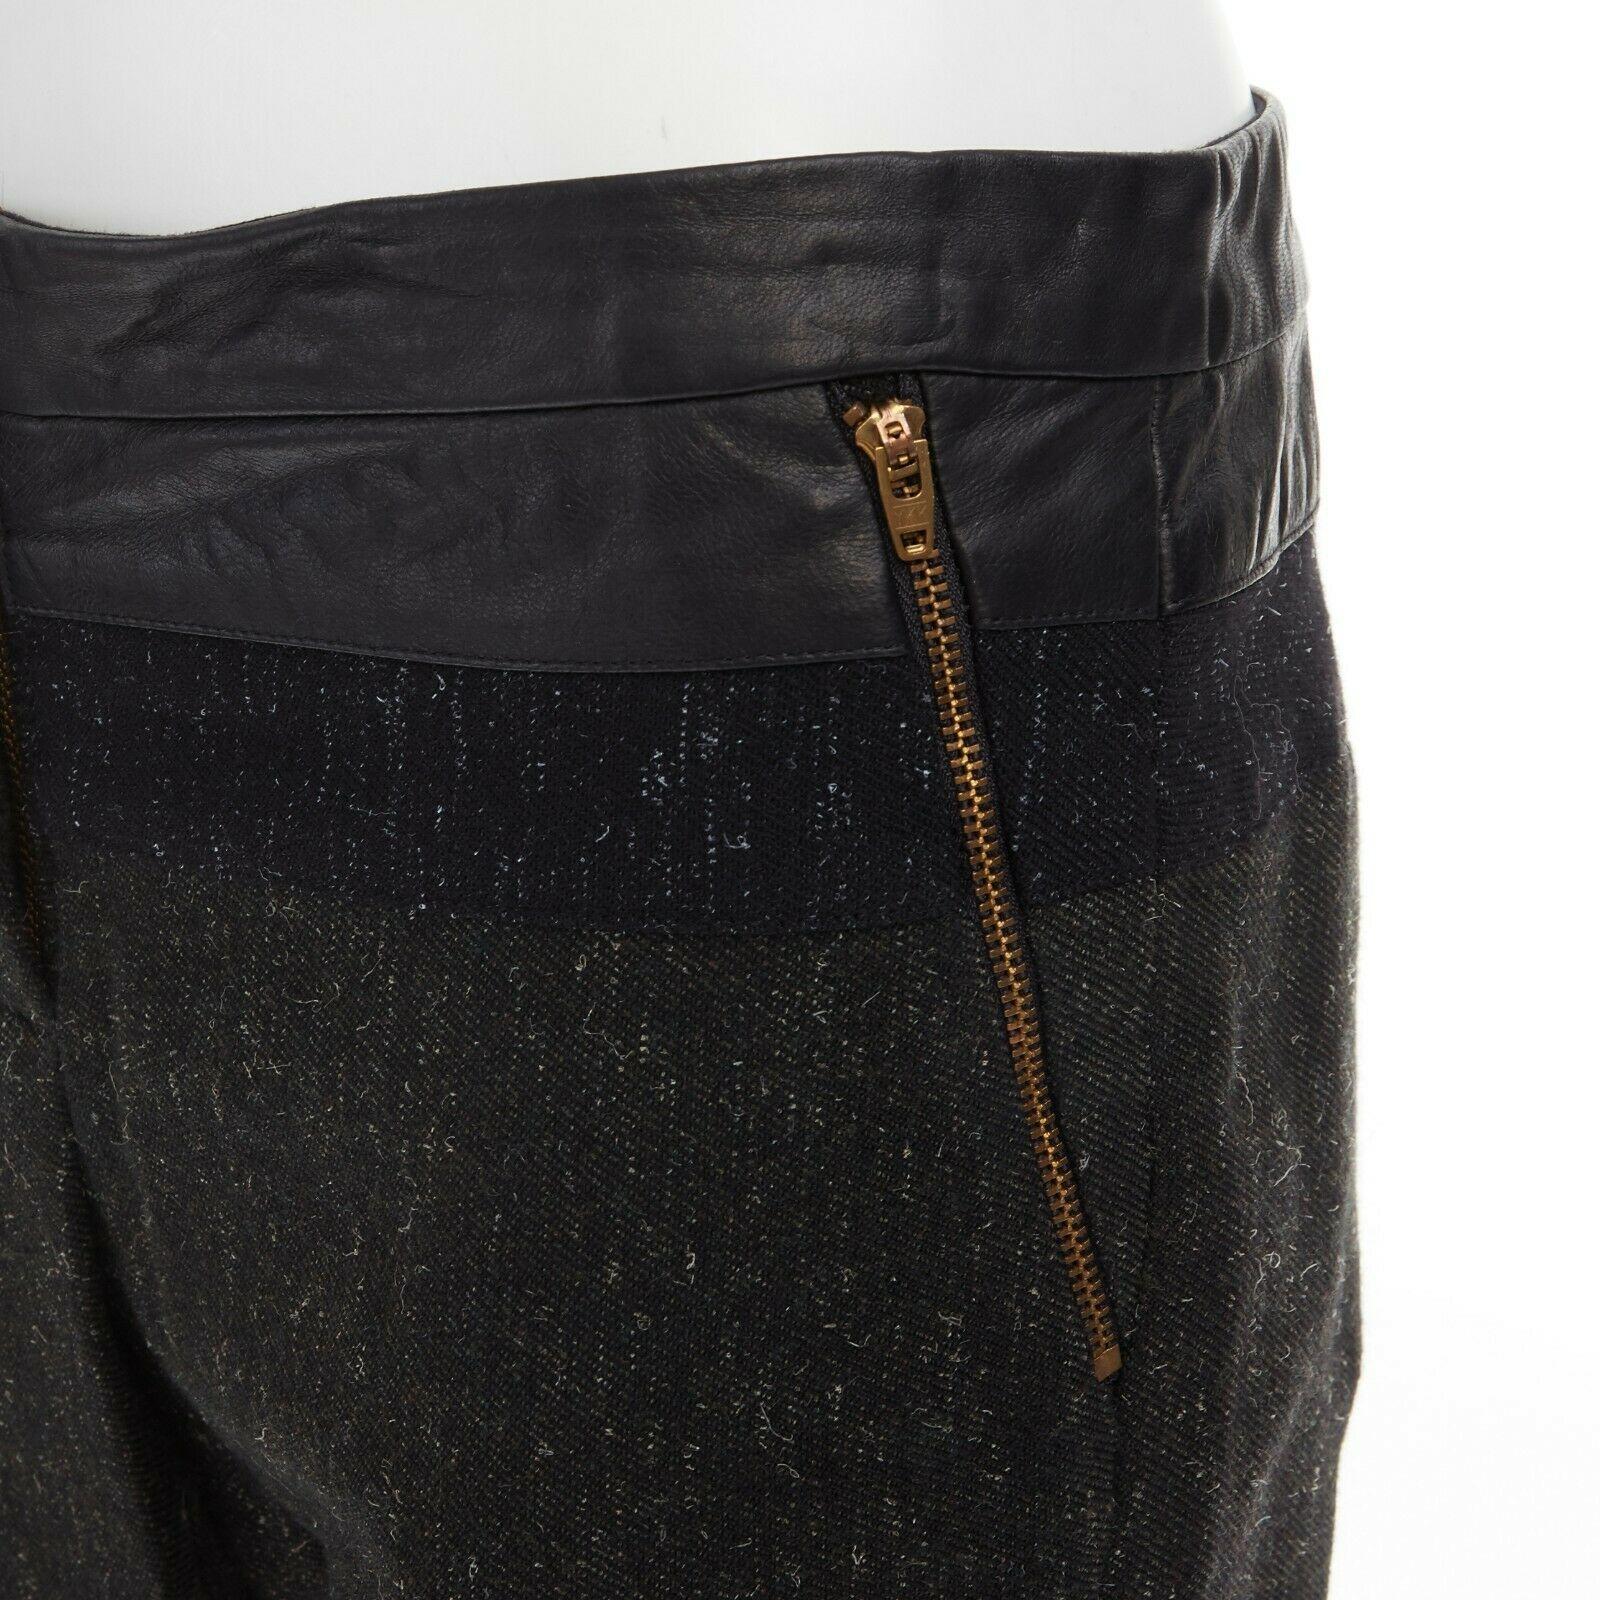 new ALC leather waist navy grey wool tweed colorblocked slim fit pants

A.L.C.
Black leather waist detail. Navy and grey wool tweed fabric. Colorblocked detail at waist. Dual zipper pocket. Concealed hook bar zip fly closure. Cropped length. Slim